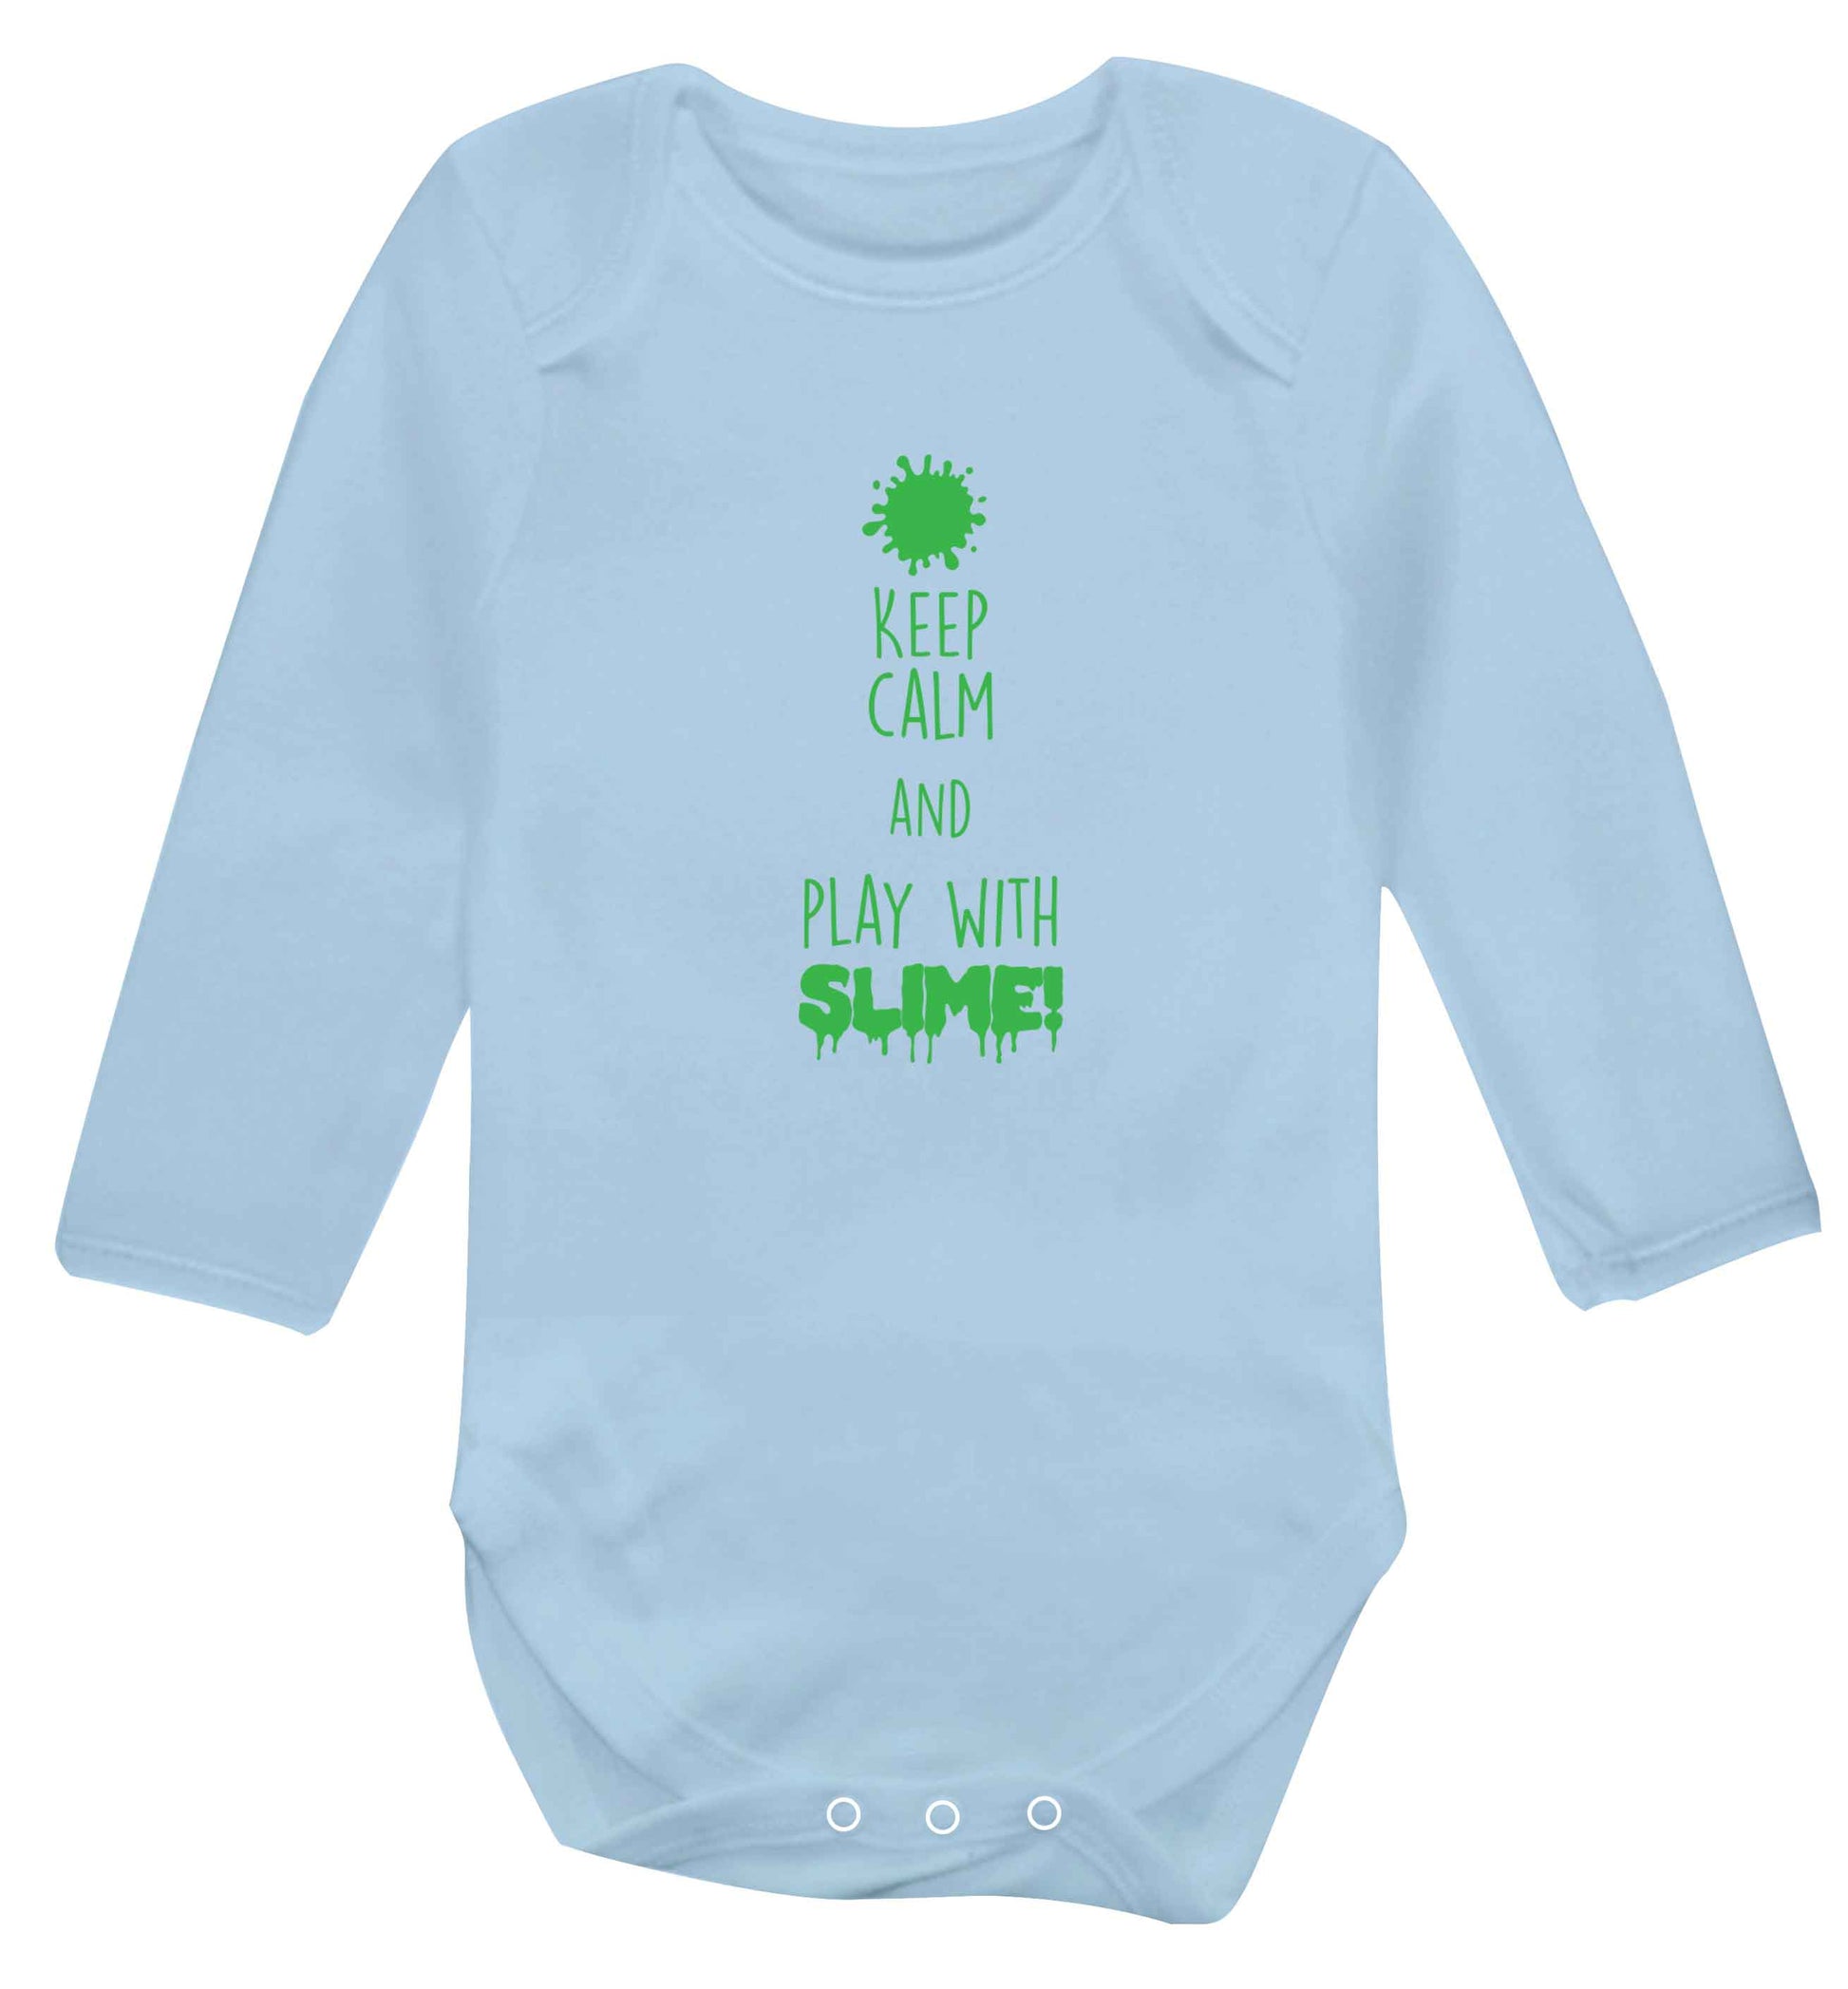 Neon green keep calm and play with slime!baby vest long sleeved pale blue 6-12 months